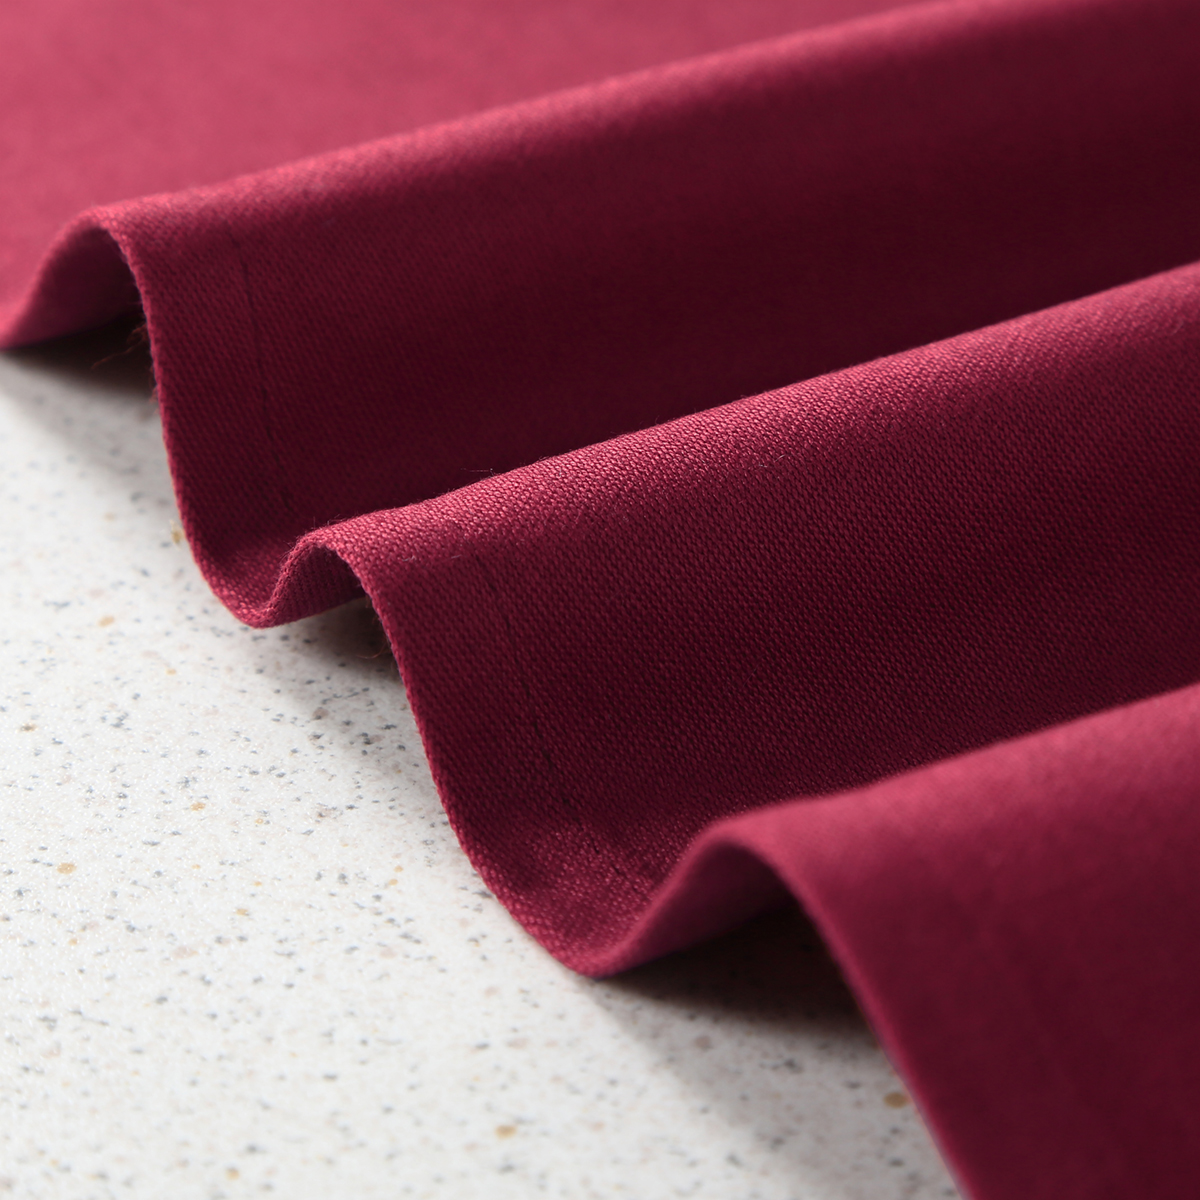 Luxuriously Soft & Hotel Quality Cotton Napkins, Brilliant Fabric Napkins Perfect for Events, Hotel & Home Use (Multi-Color)